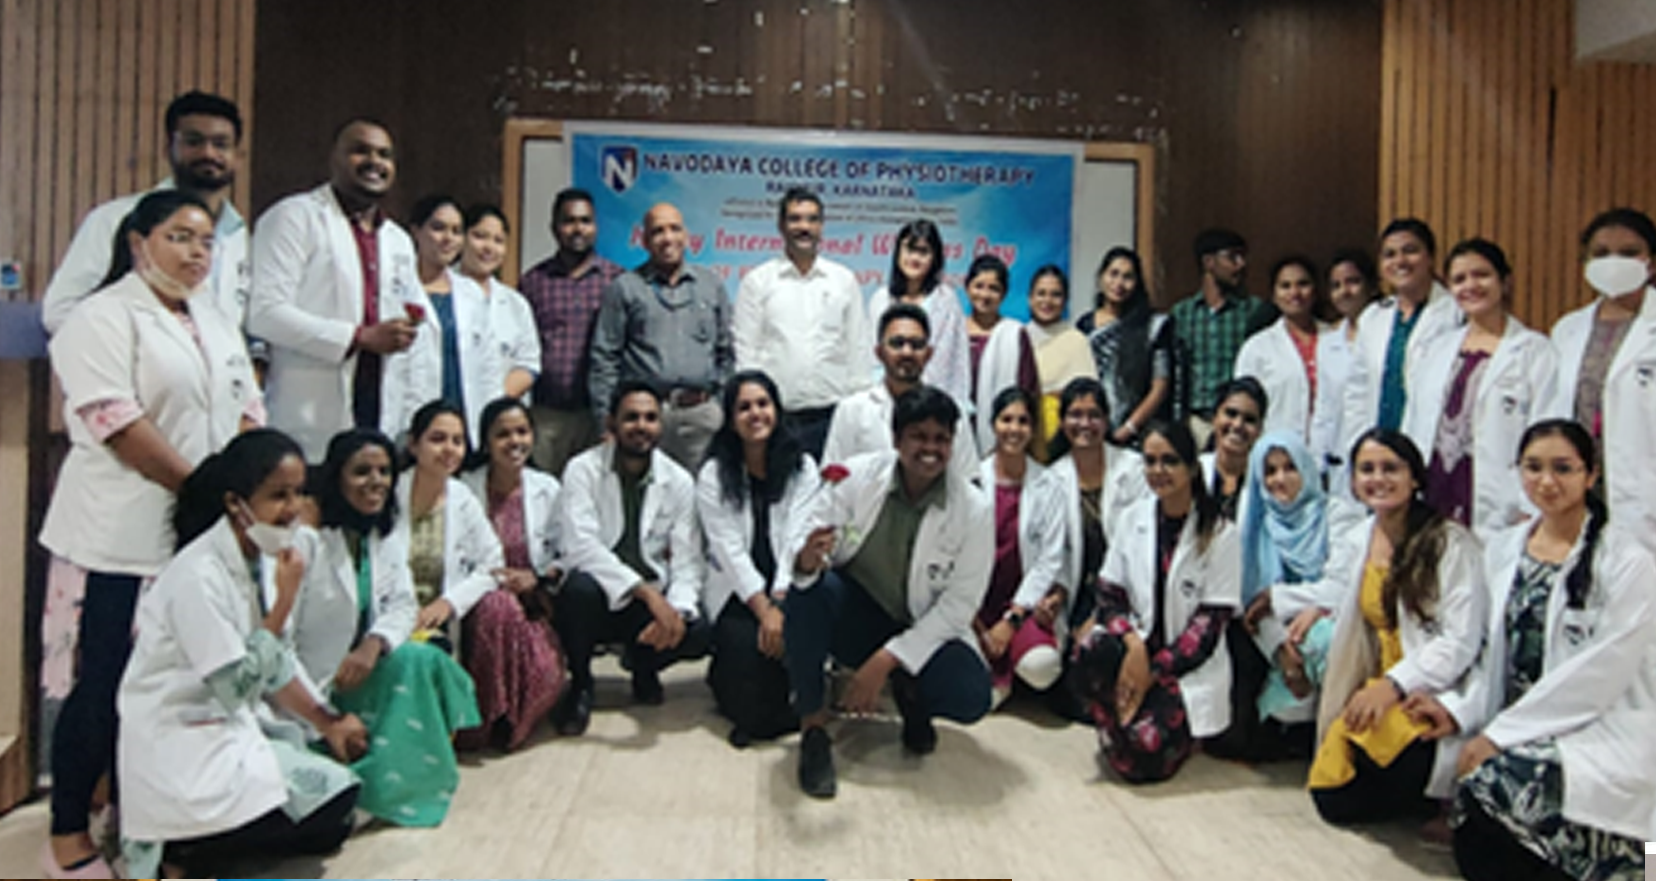 SEMINAR ROLE OF PHYSIOTHERAPY IN LABOUR